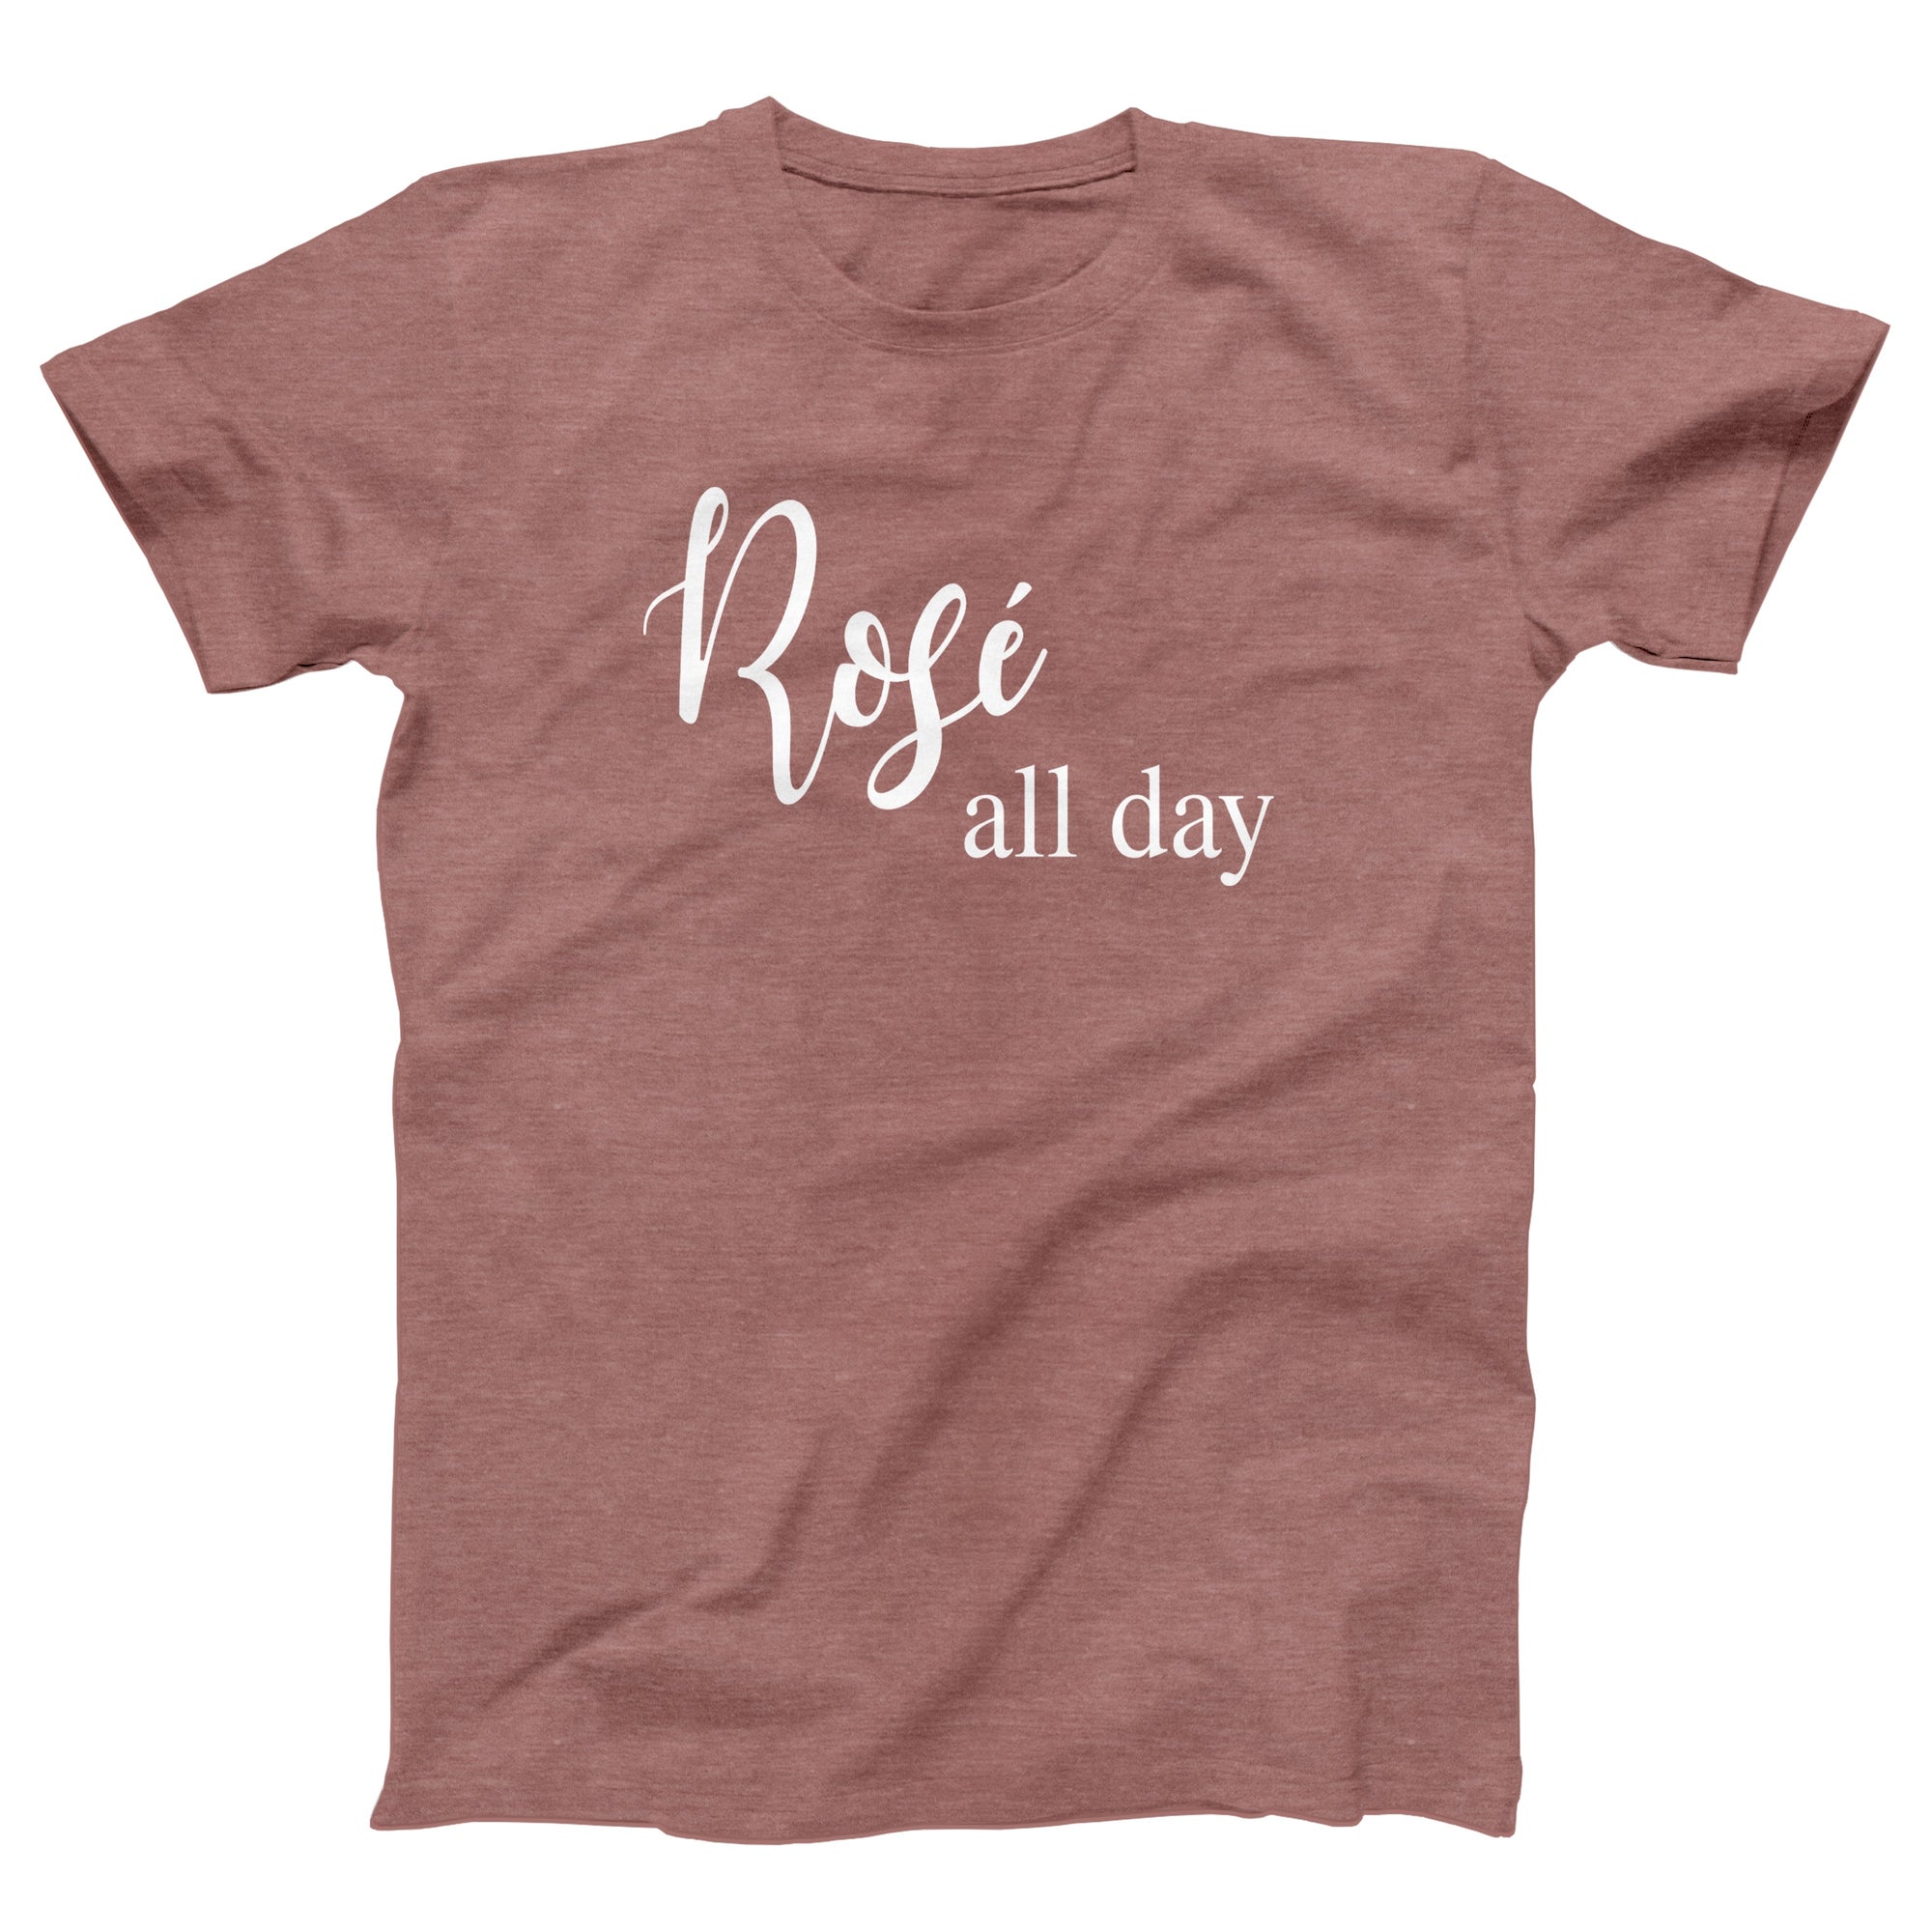 Rosé All Day Adult Unisex T-Shirt - Twisted Gorilla